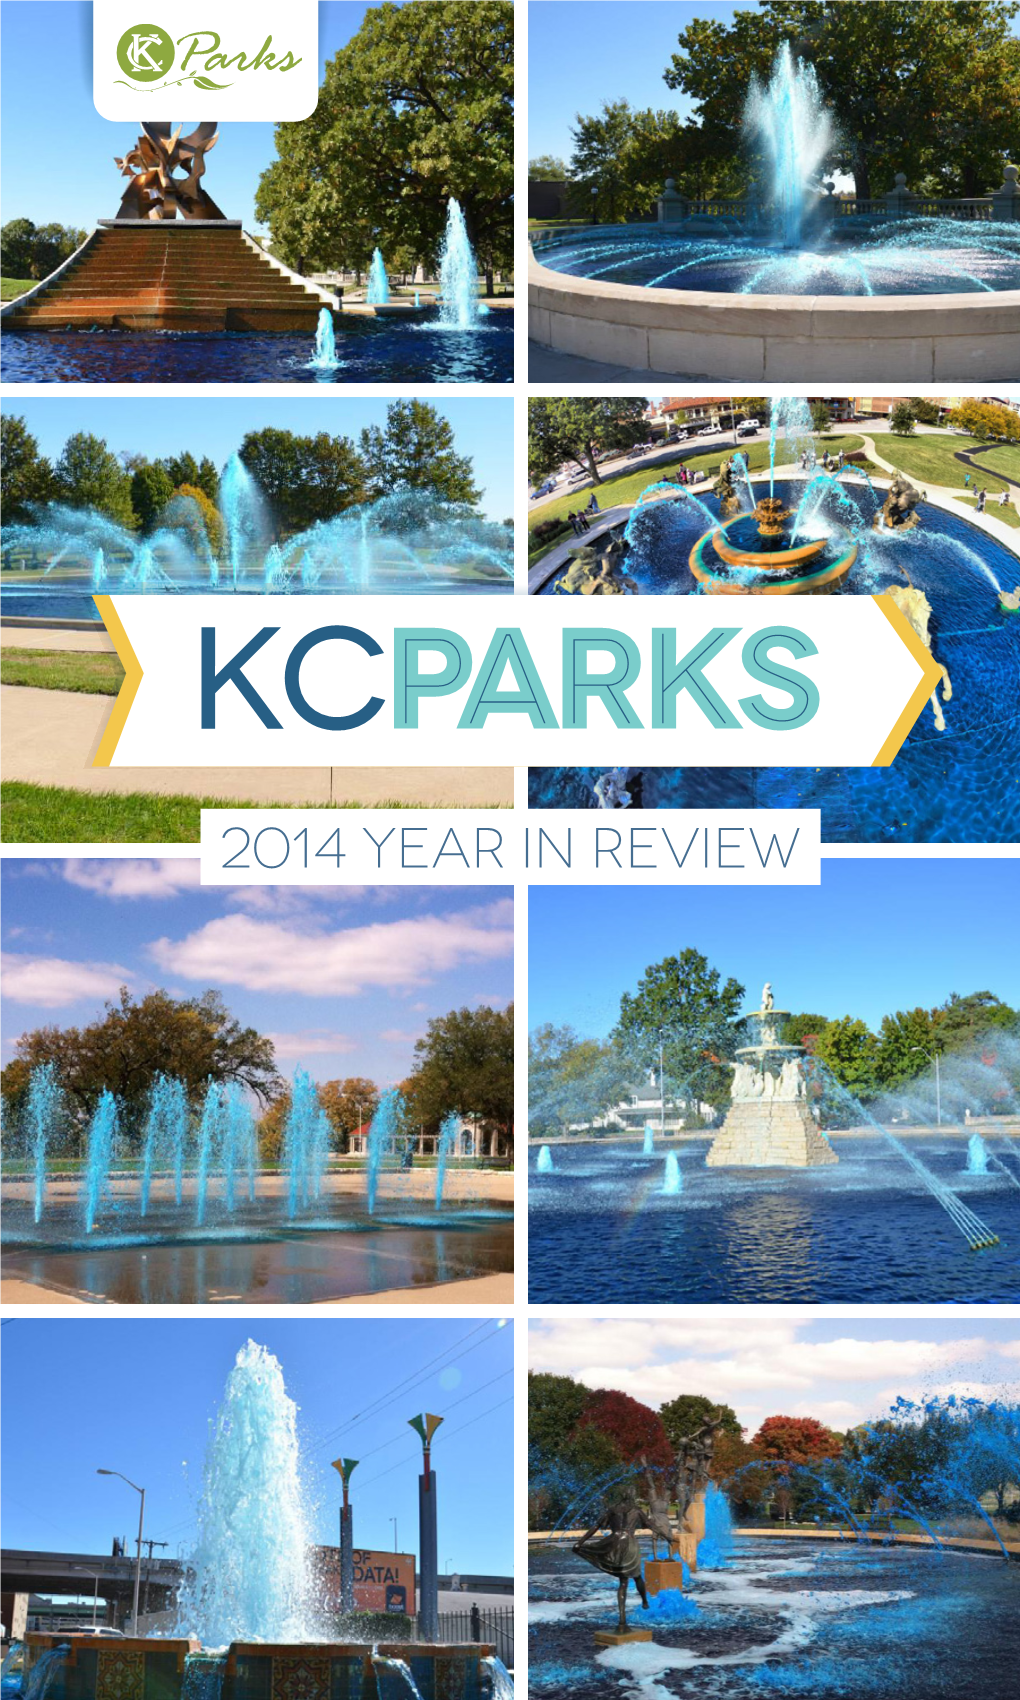 KC Parks 2014 Year in Review